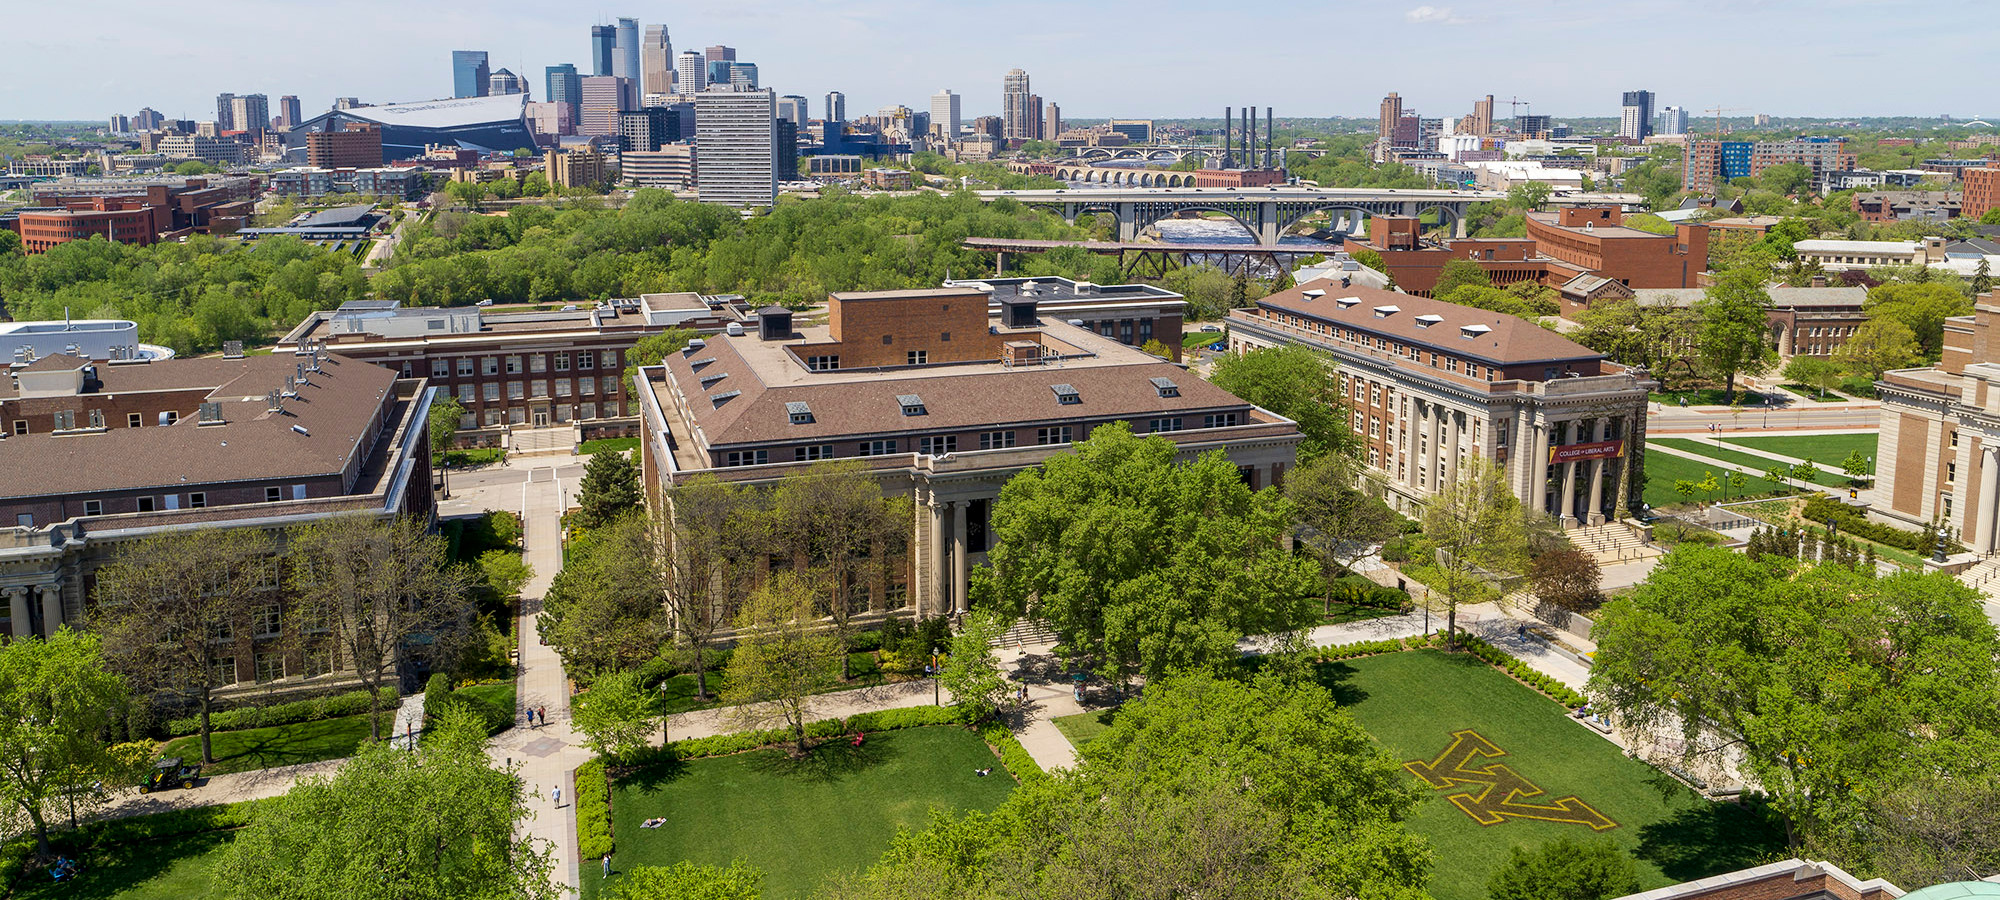 Aerial view of the East Bank campus mall with the Minneapolis skyline